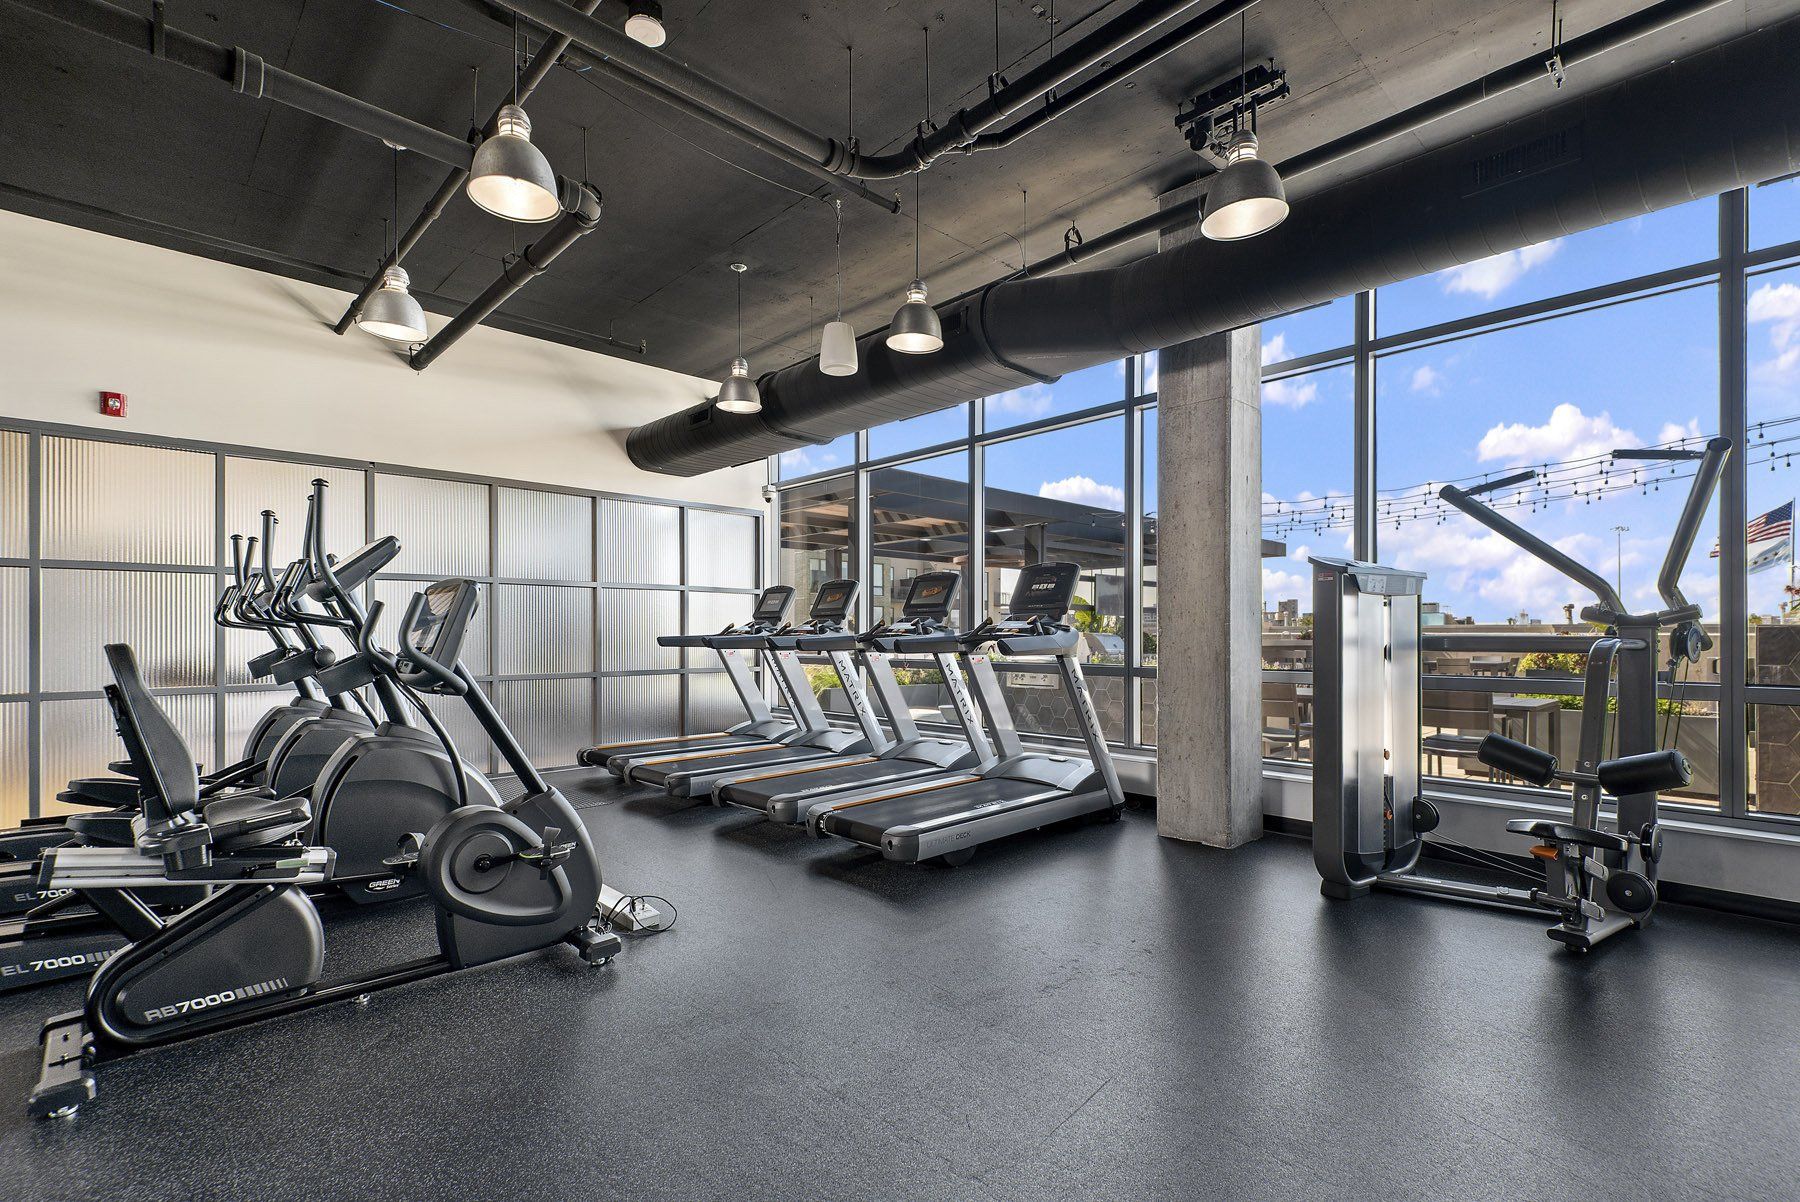 A large gym with a lot of treadmills and exercise bikes at Reside on Green Street.